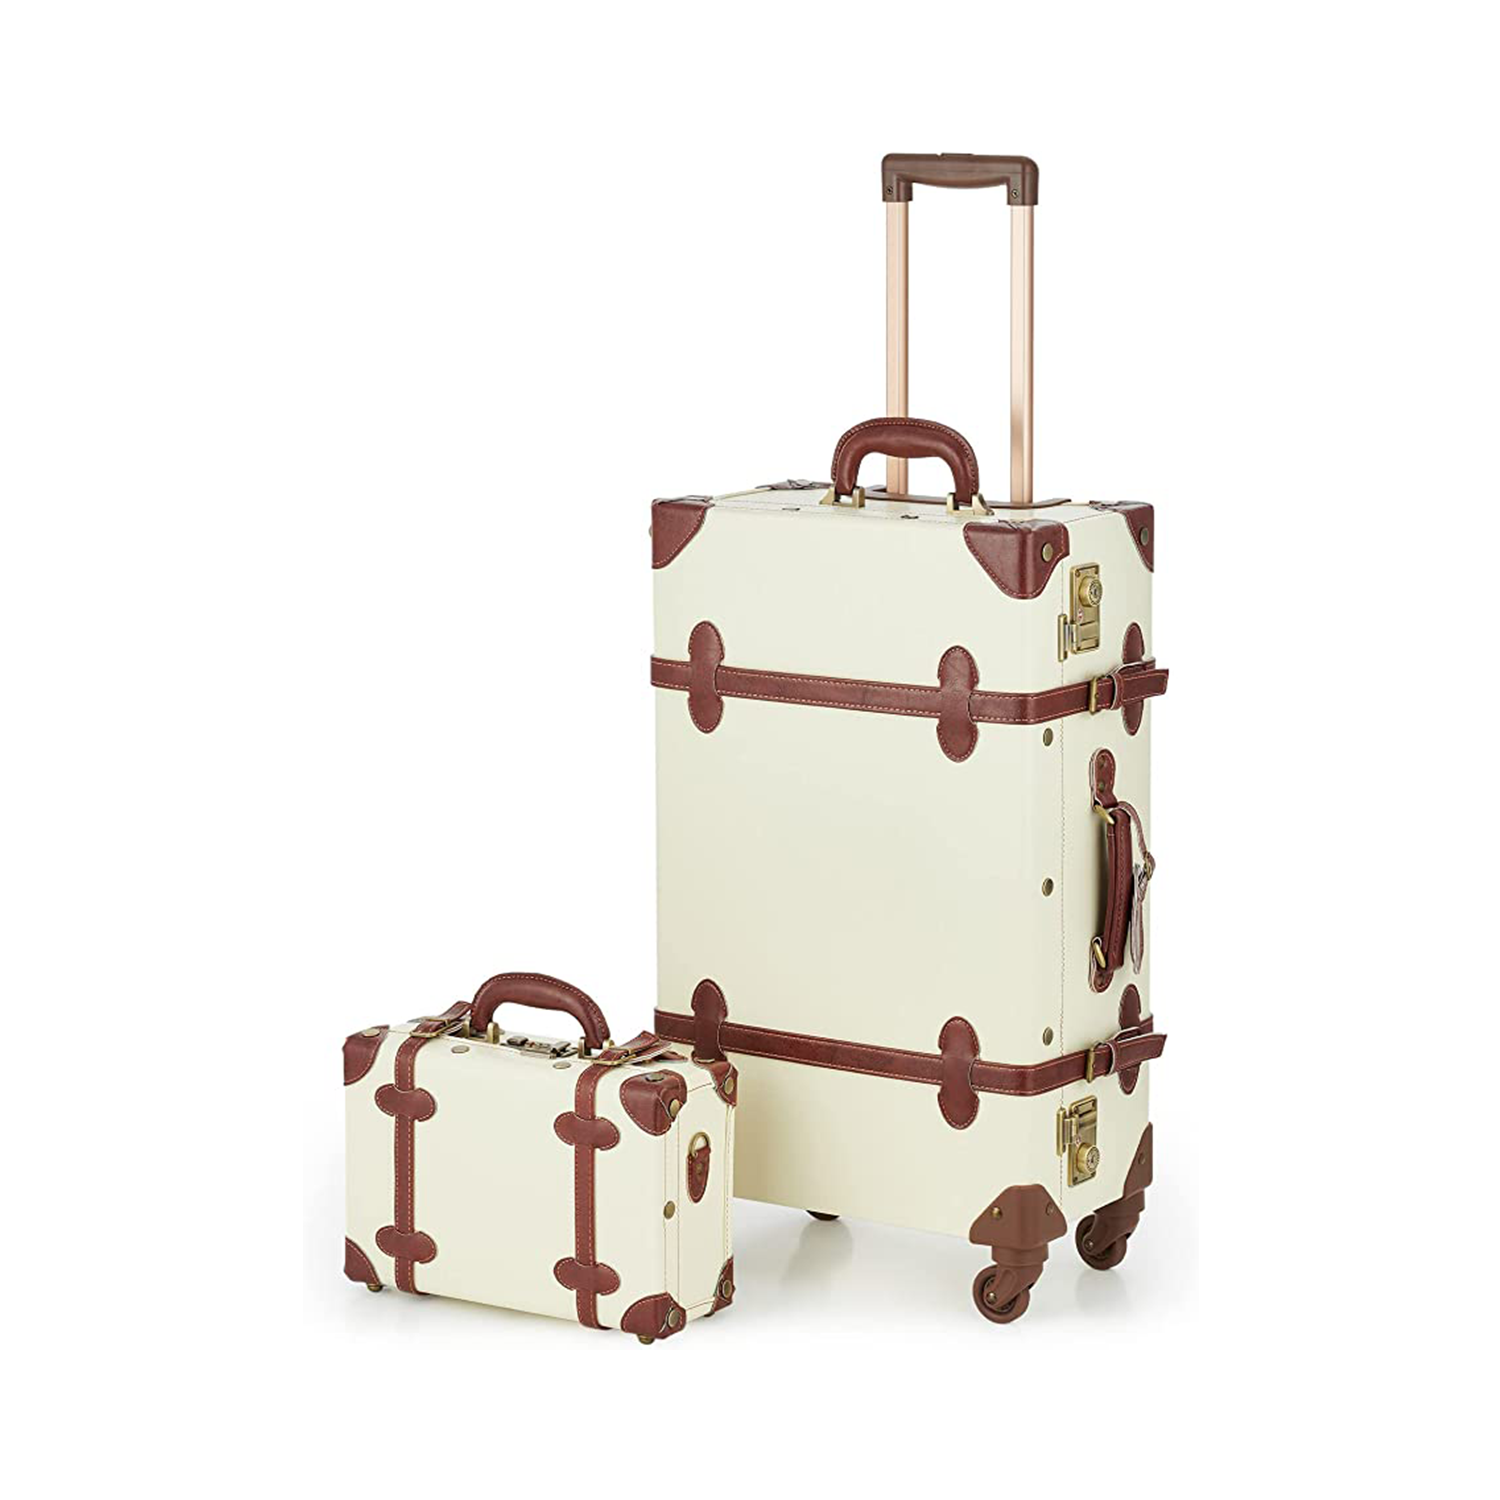 co-z vintage luggage sets brown and cream